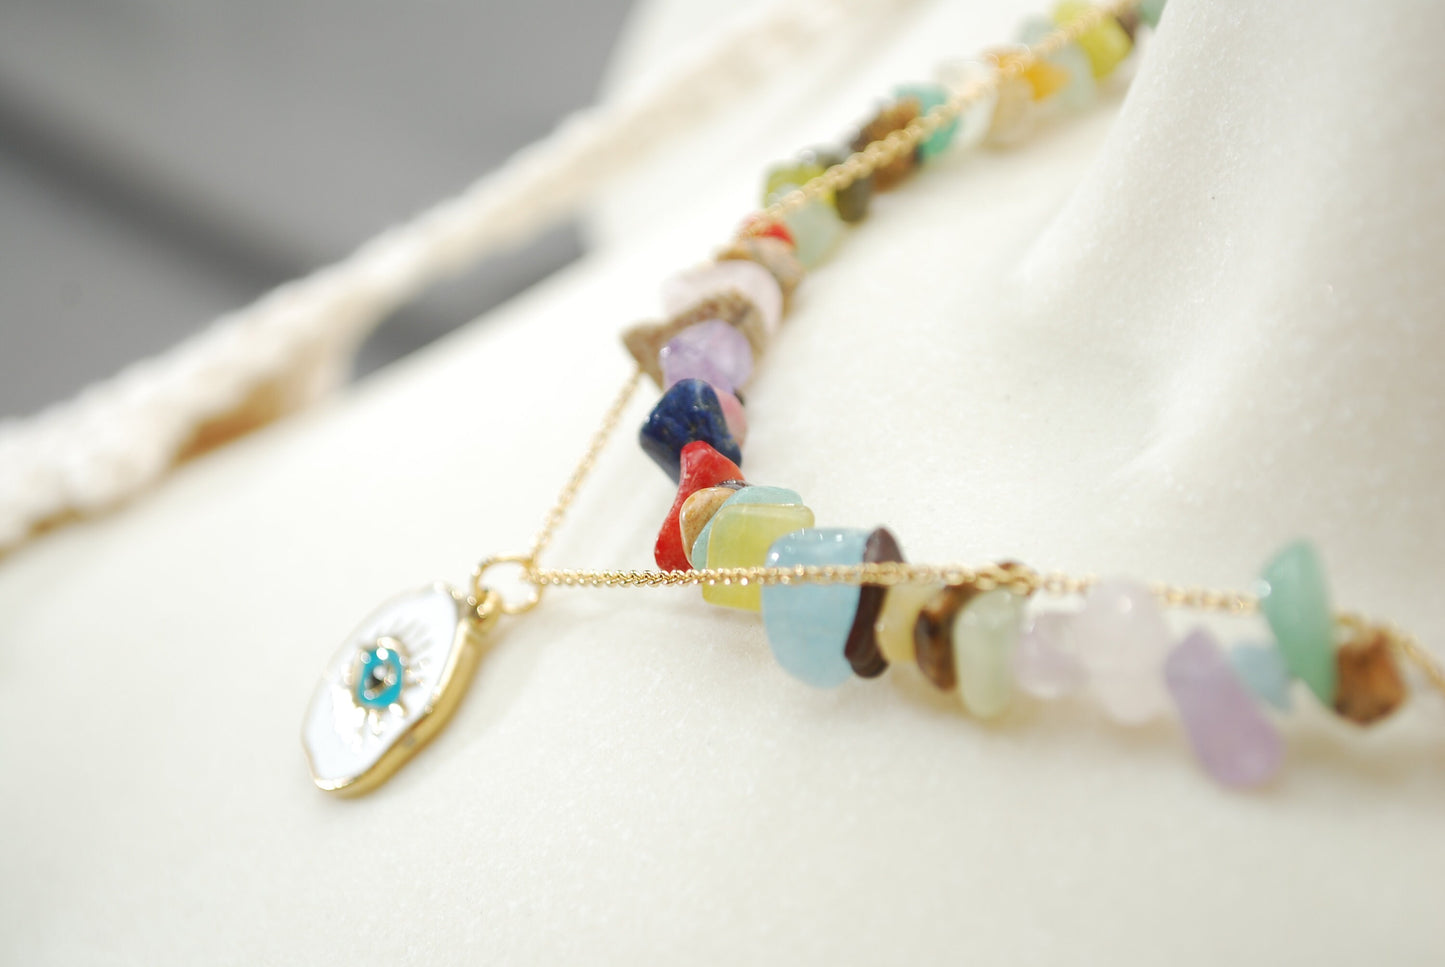 Bohemian glam: 2 necklaces in one set, ideal for holidays, versatile wear.